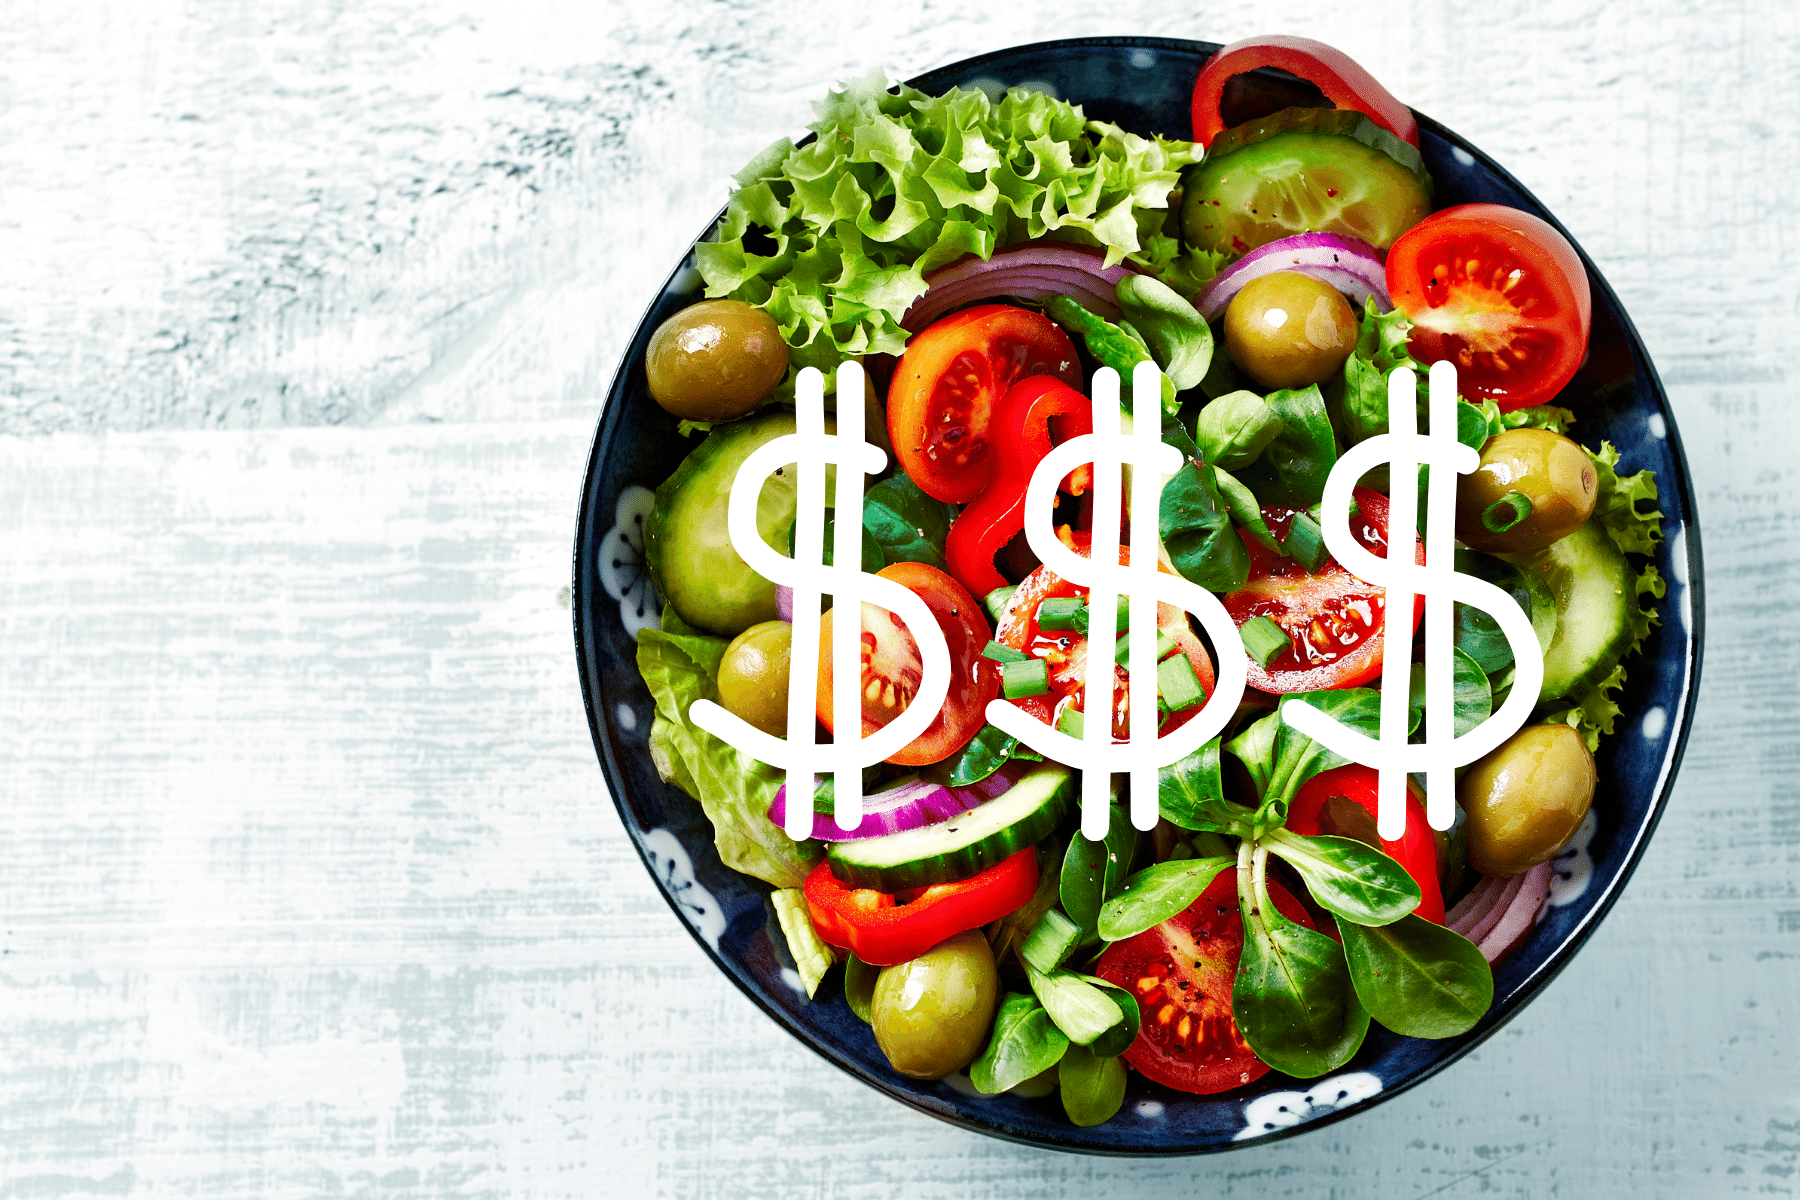 picture of a salad and the tomatoes are dollar signs.